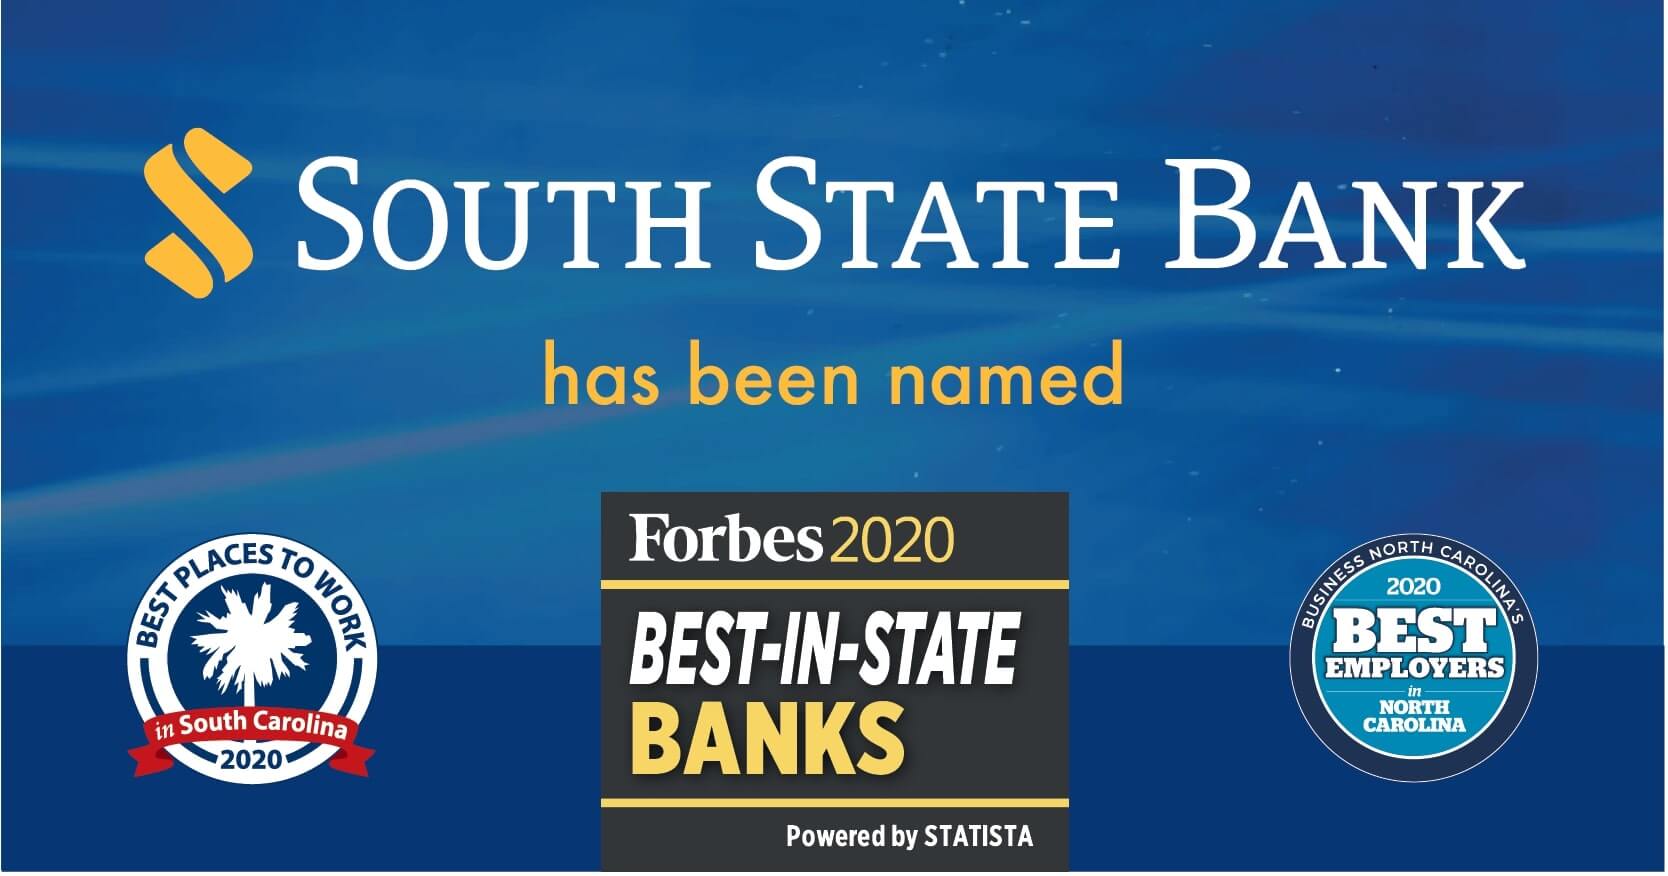 South State Bank Earns Forbes’ “Best-in-State Banks” Distinction and Best Workplace Awards